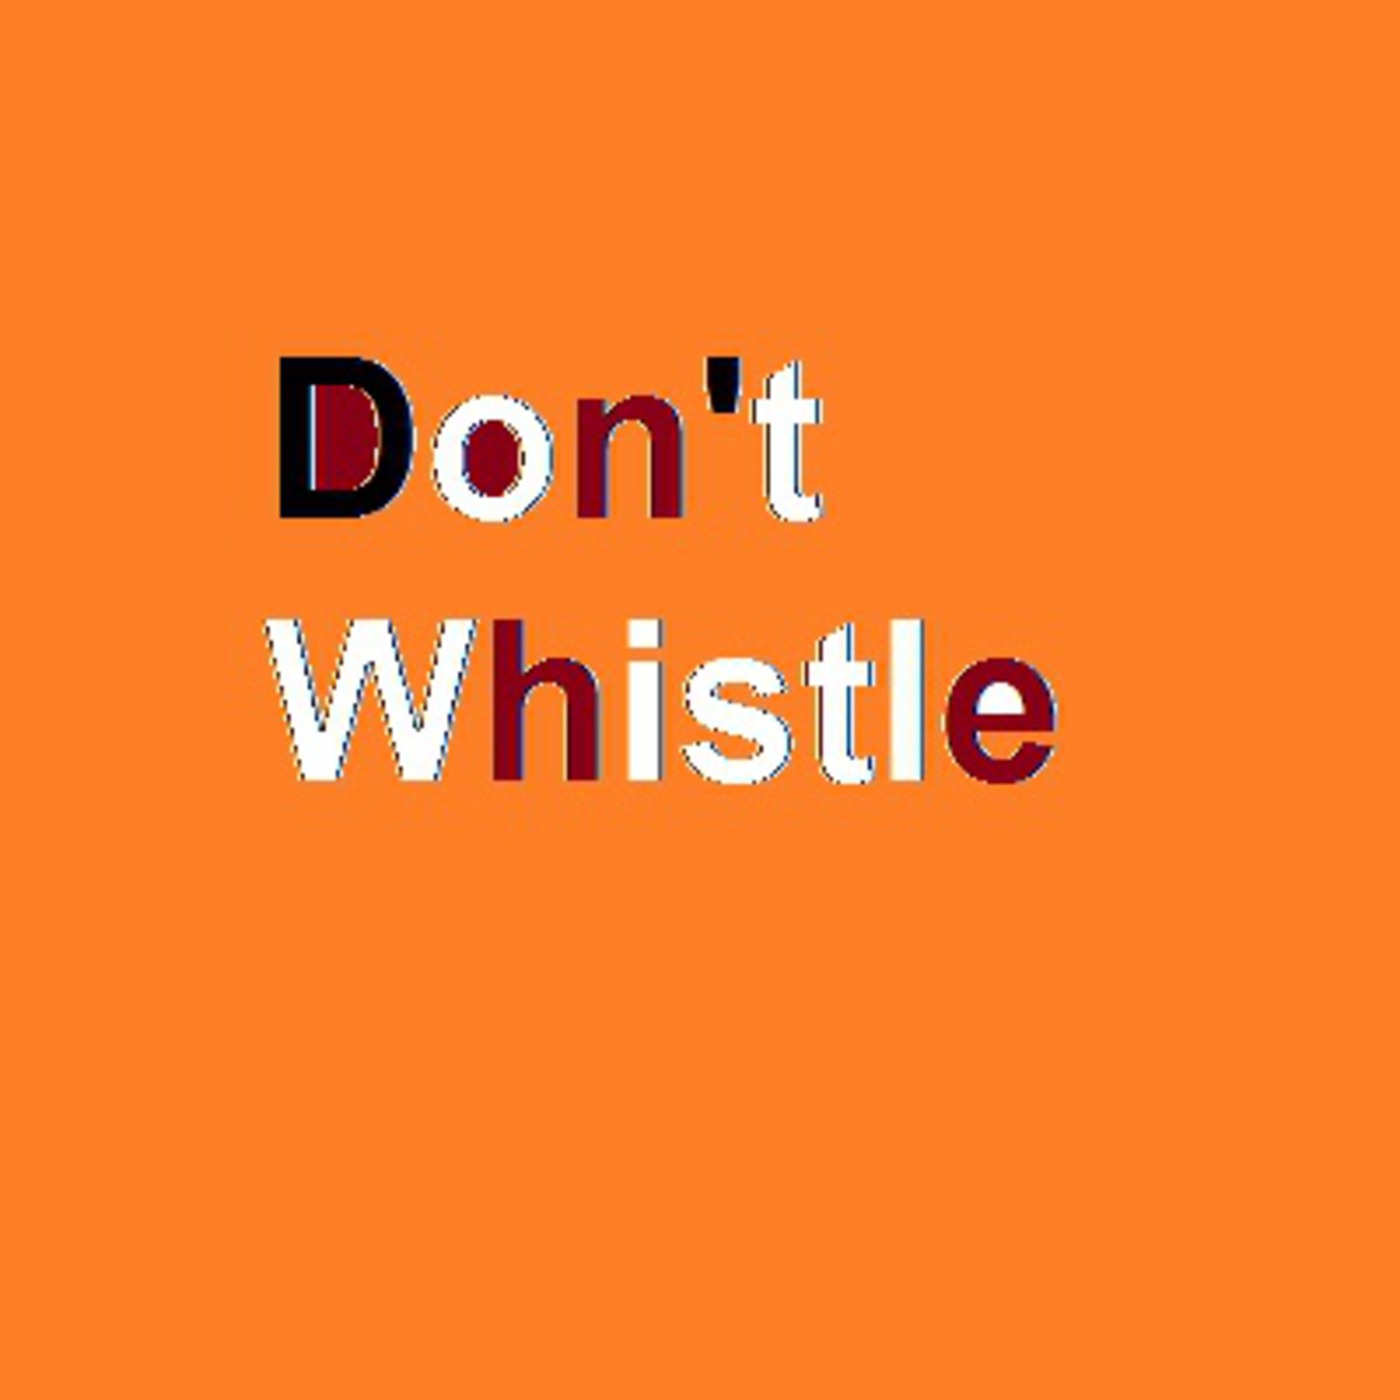 Don't whistle